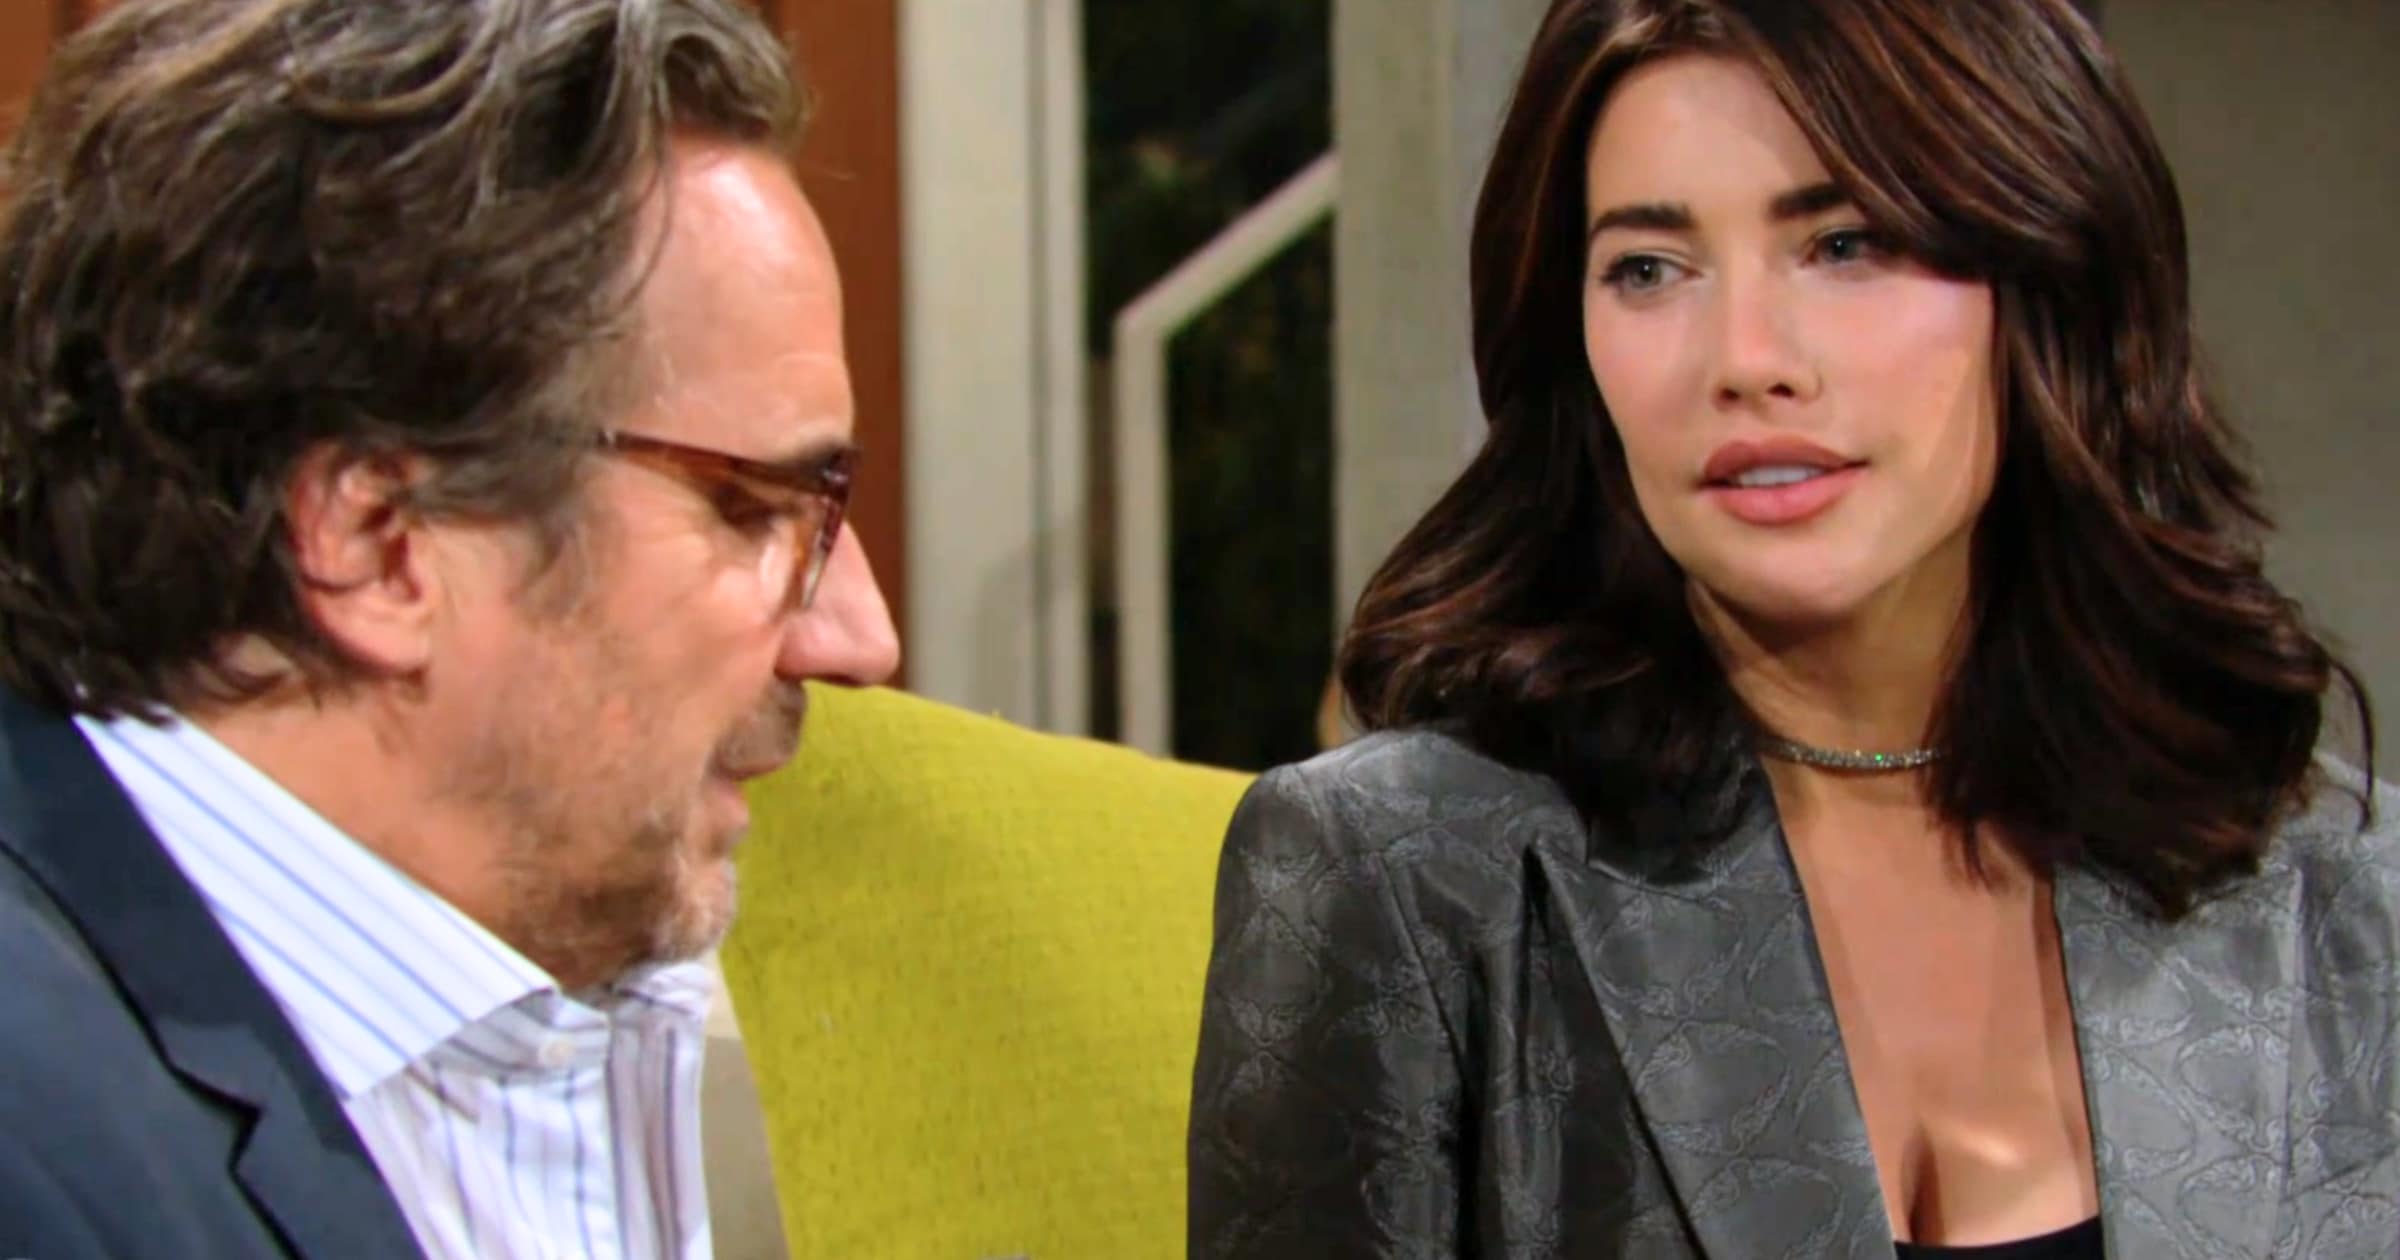 The Bold and the Beautiful - Nov 8 - Ridge and Steffy